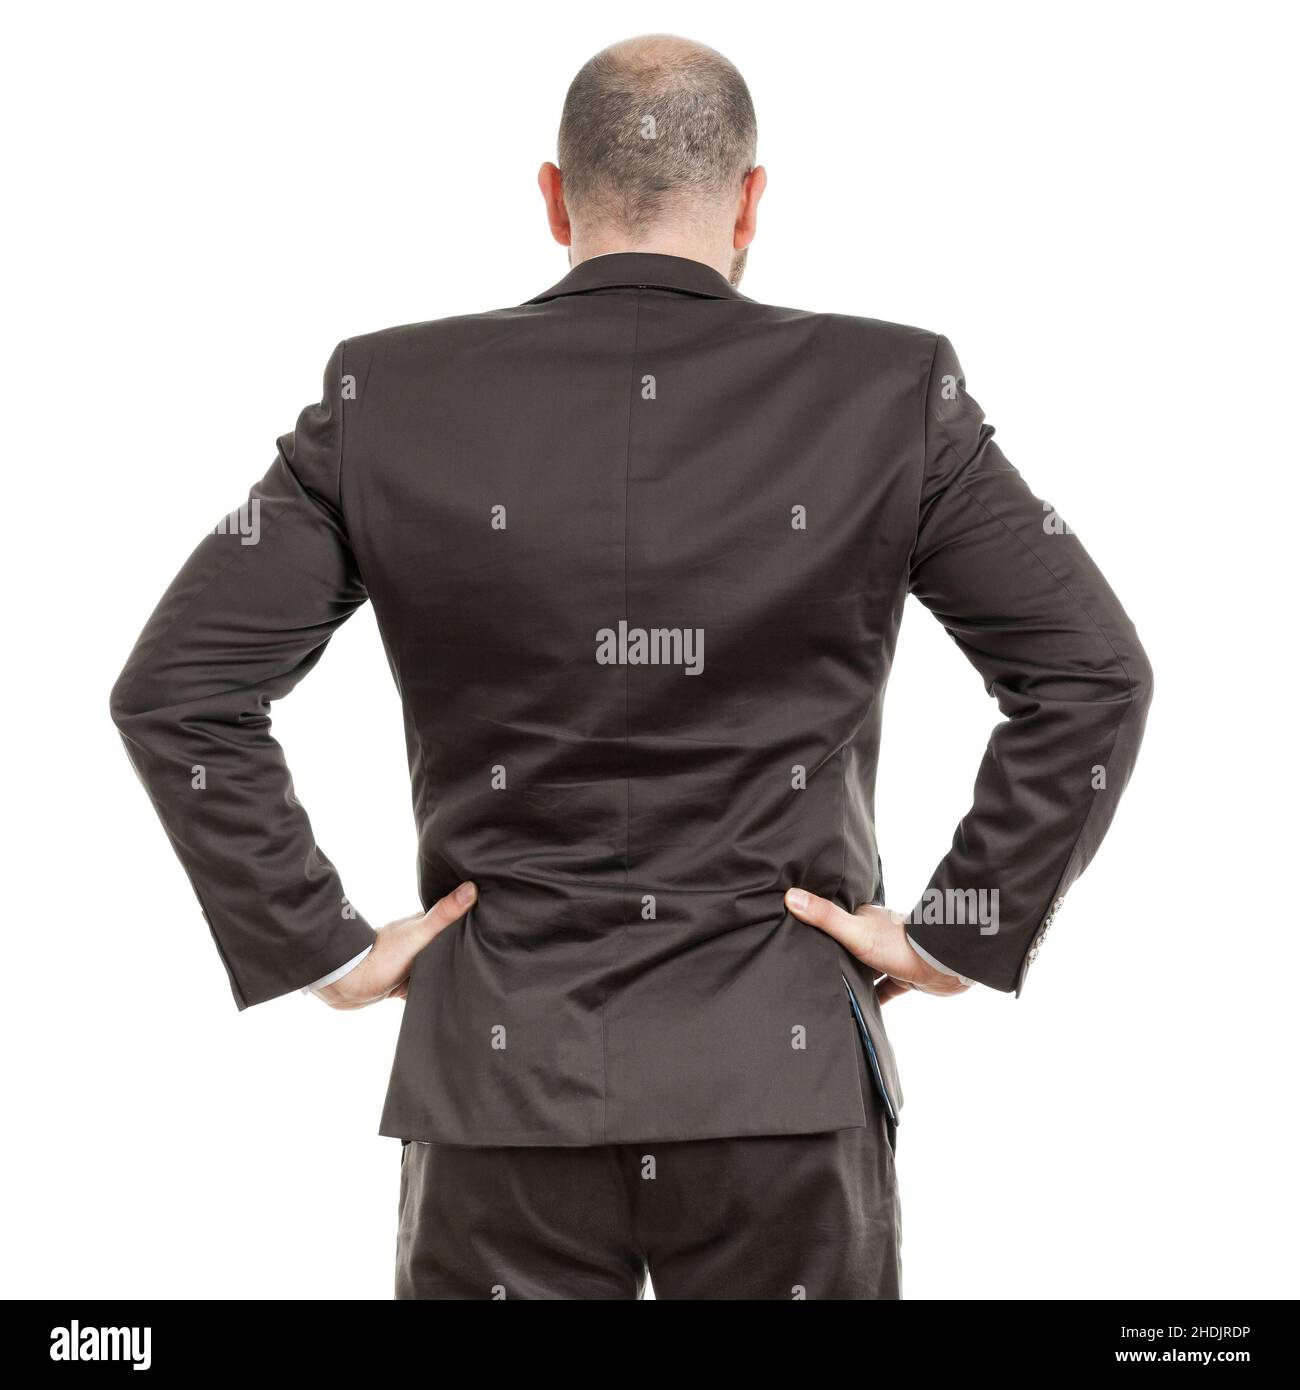 businessman, rear view, determined, boss, businessmen, executive, executives, leader, leaders, manager, rear, rear views, determineds Stock Photo